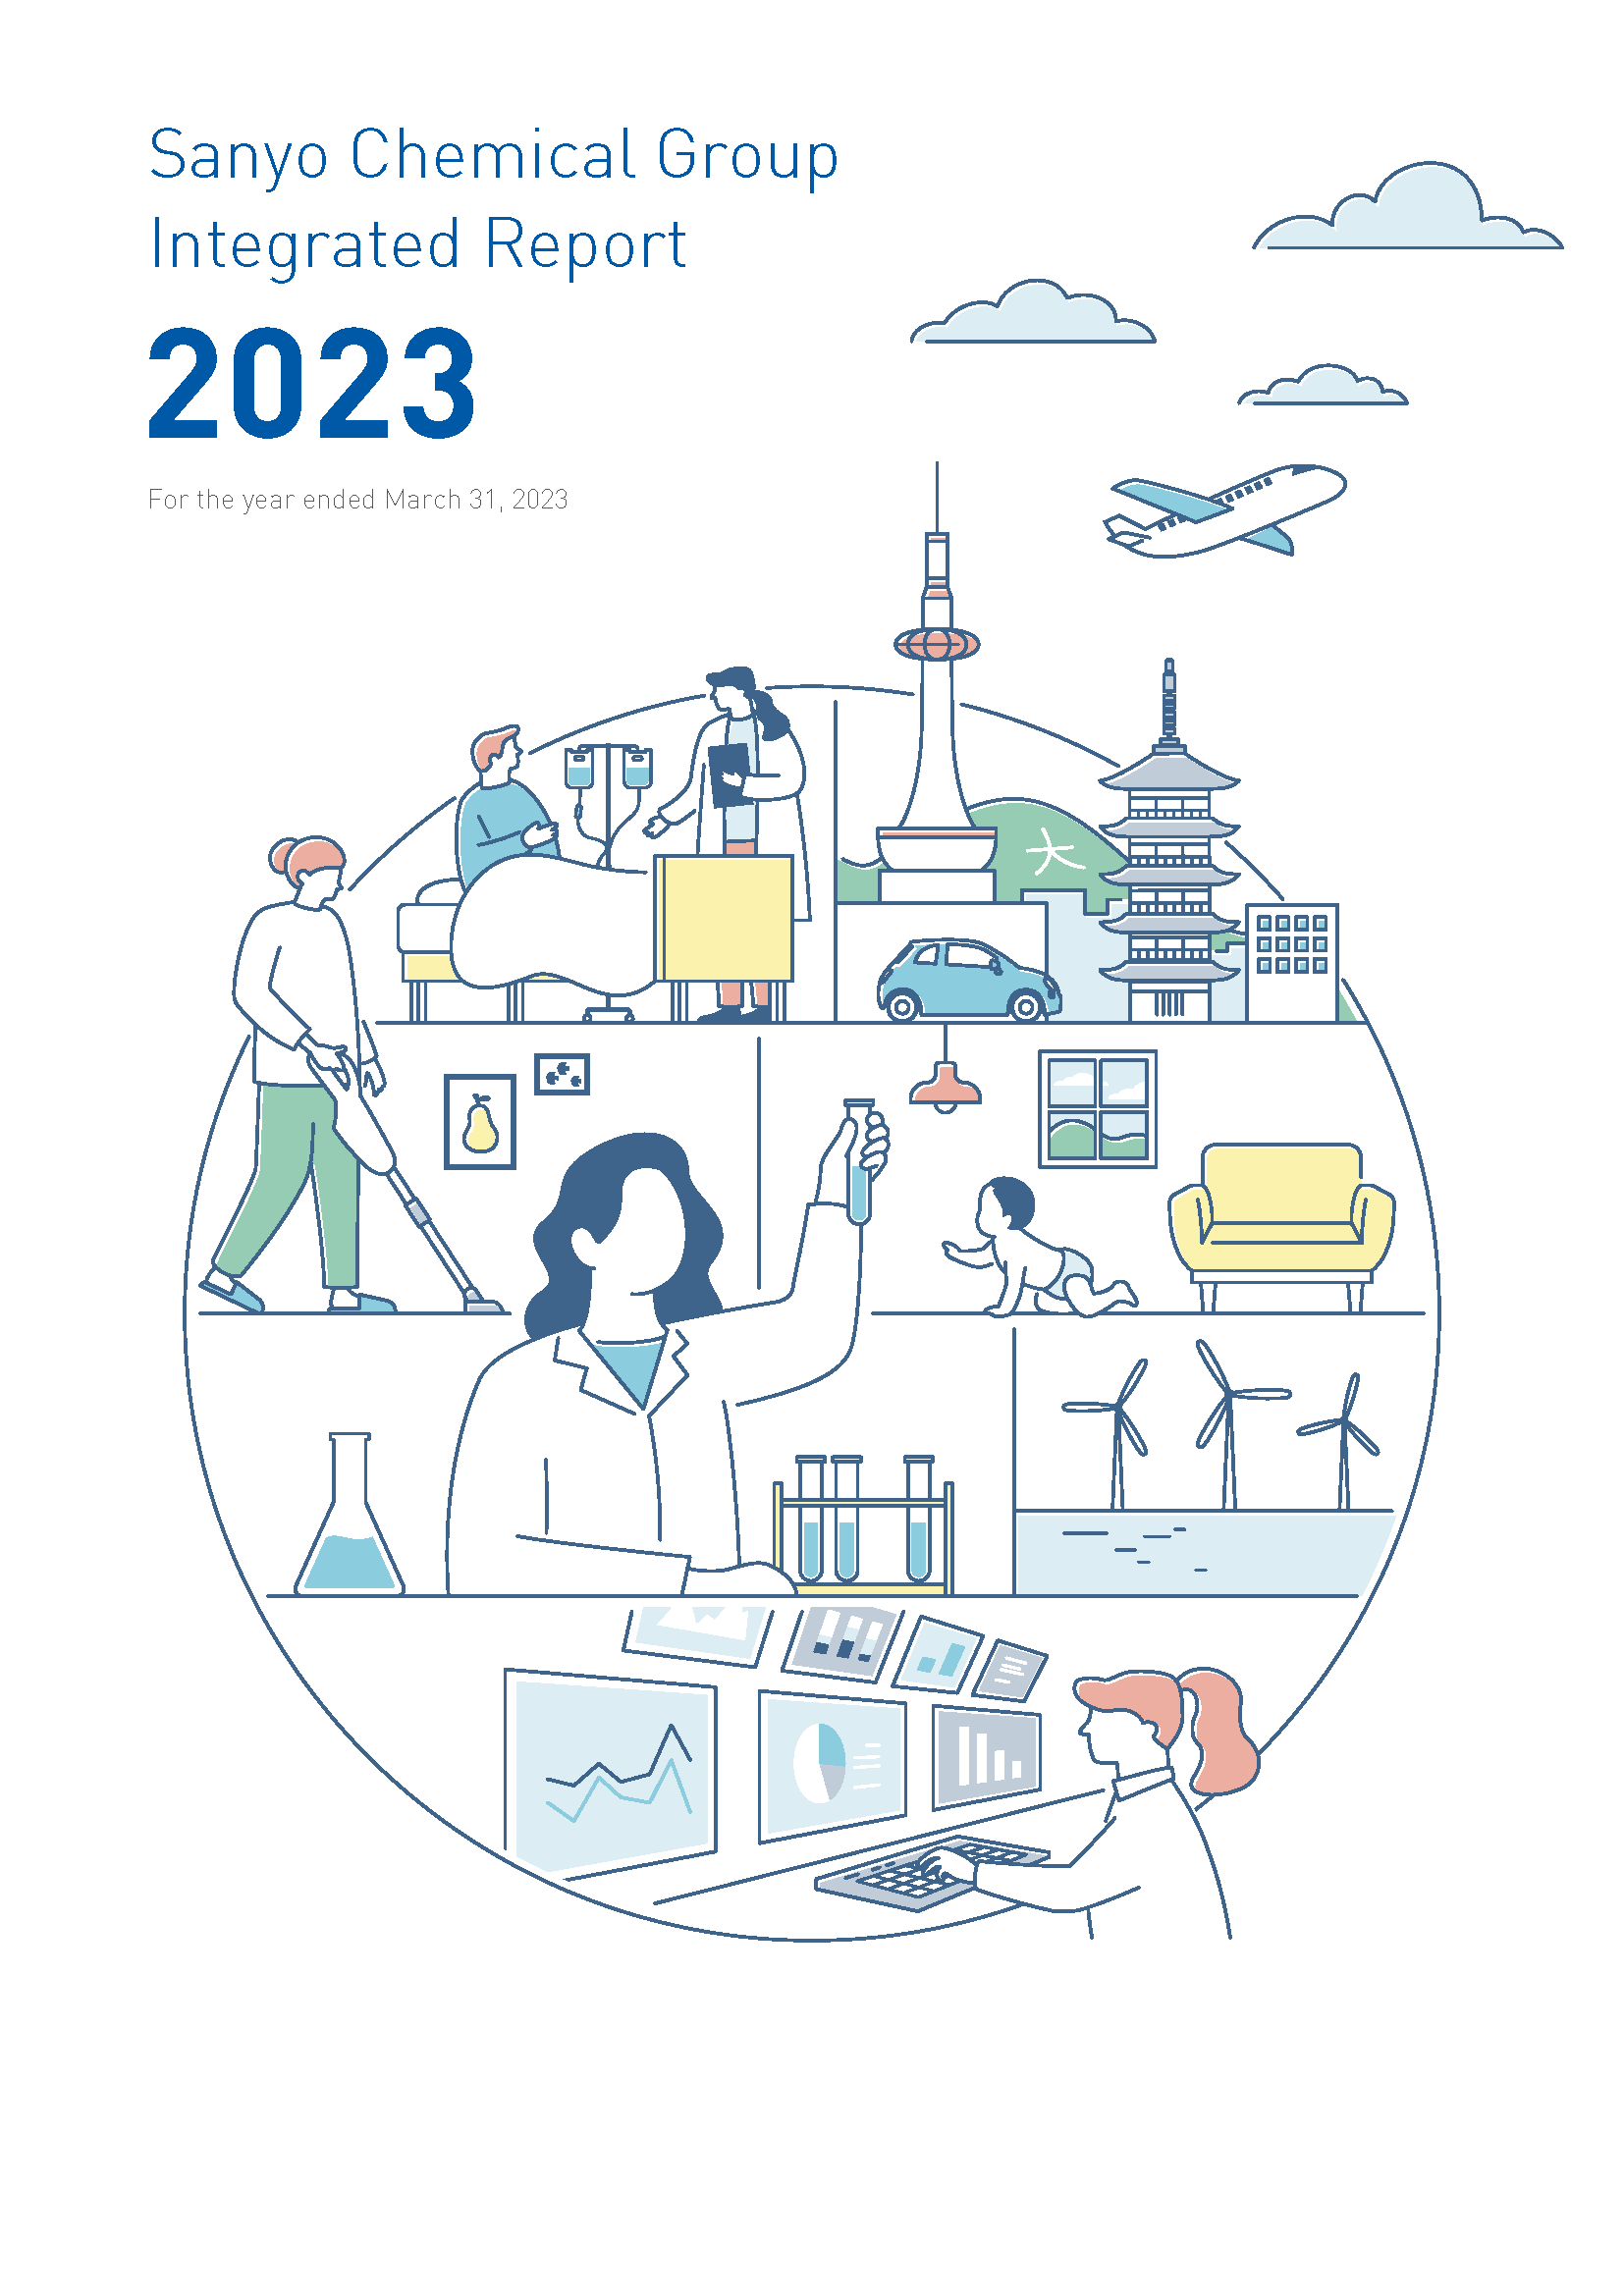 Integrated Report 2023 (For the year ended March 31, 2023)